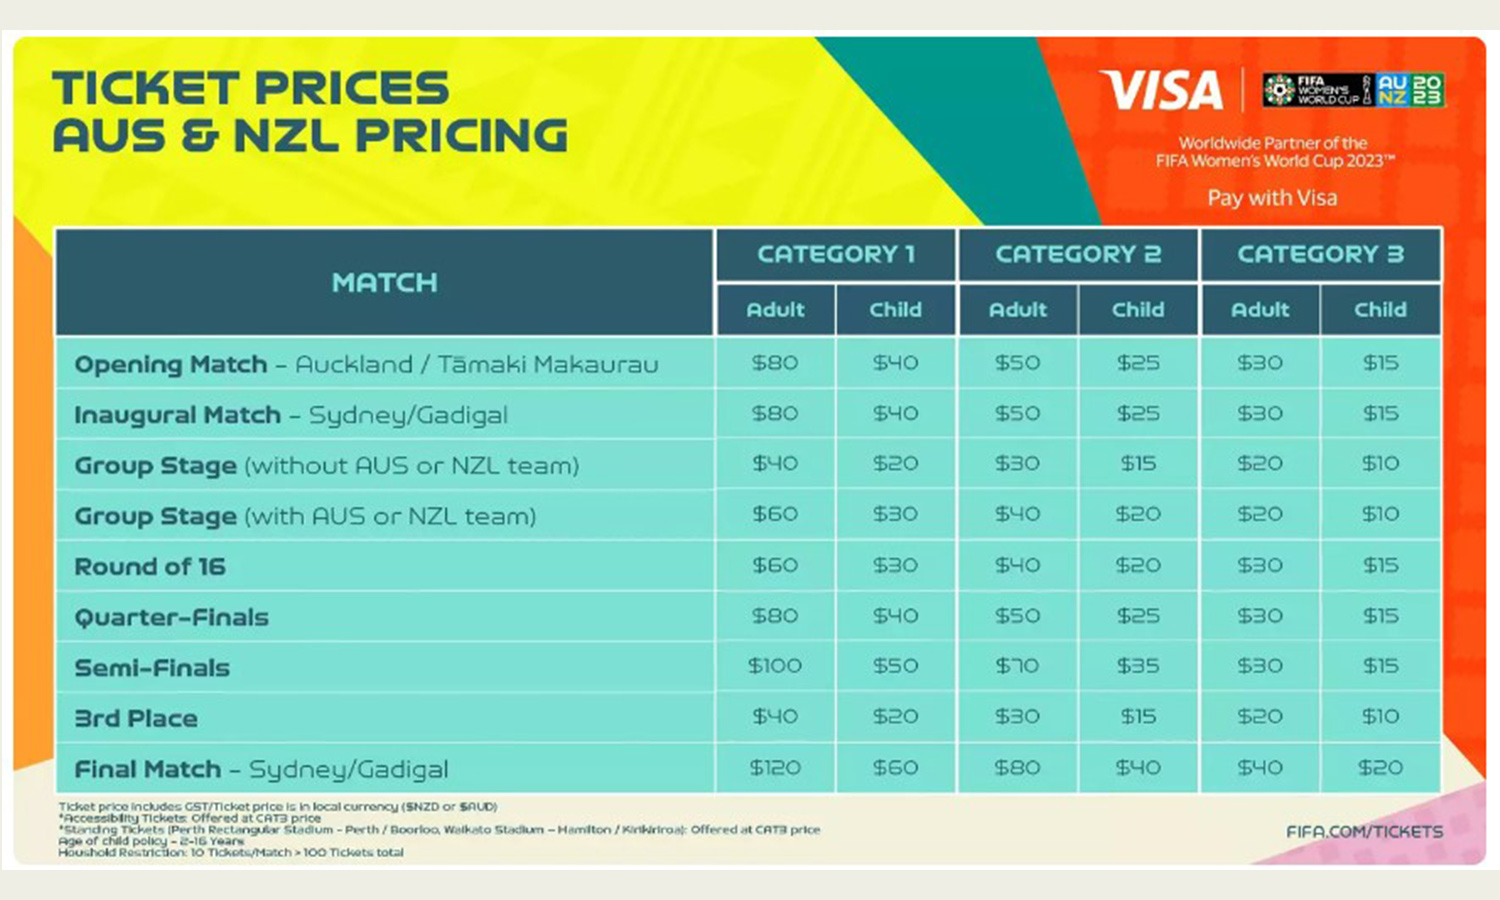 Ticket prices for the Fifa women's world cup 2023